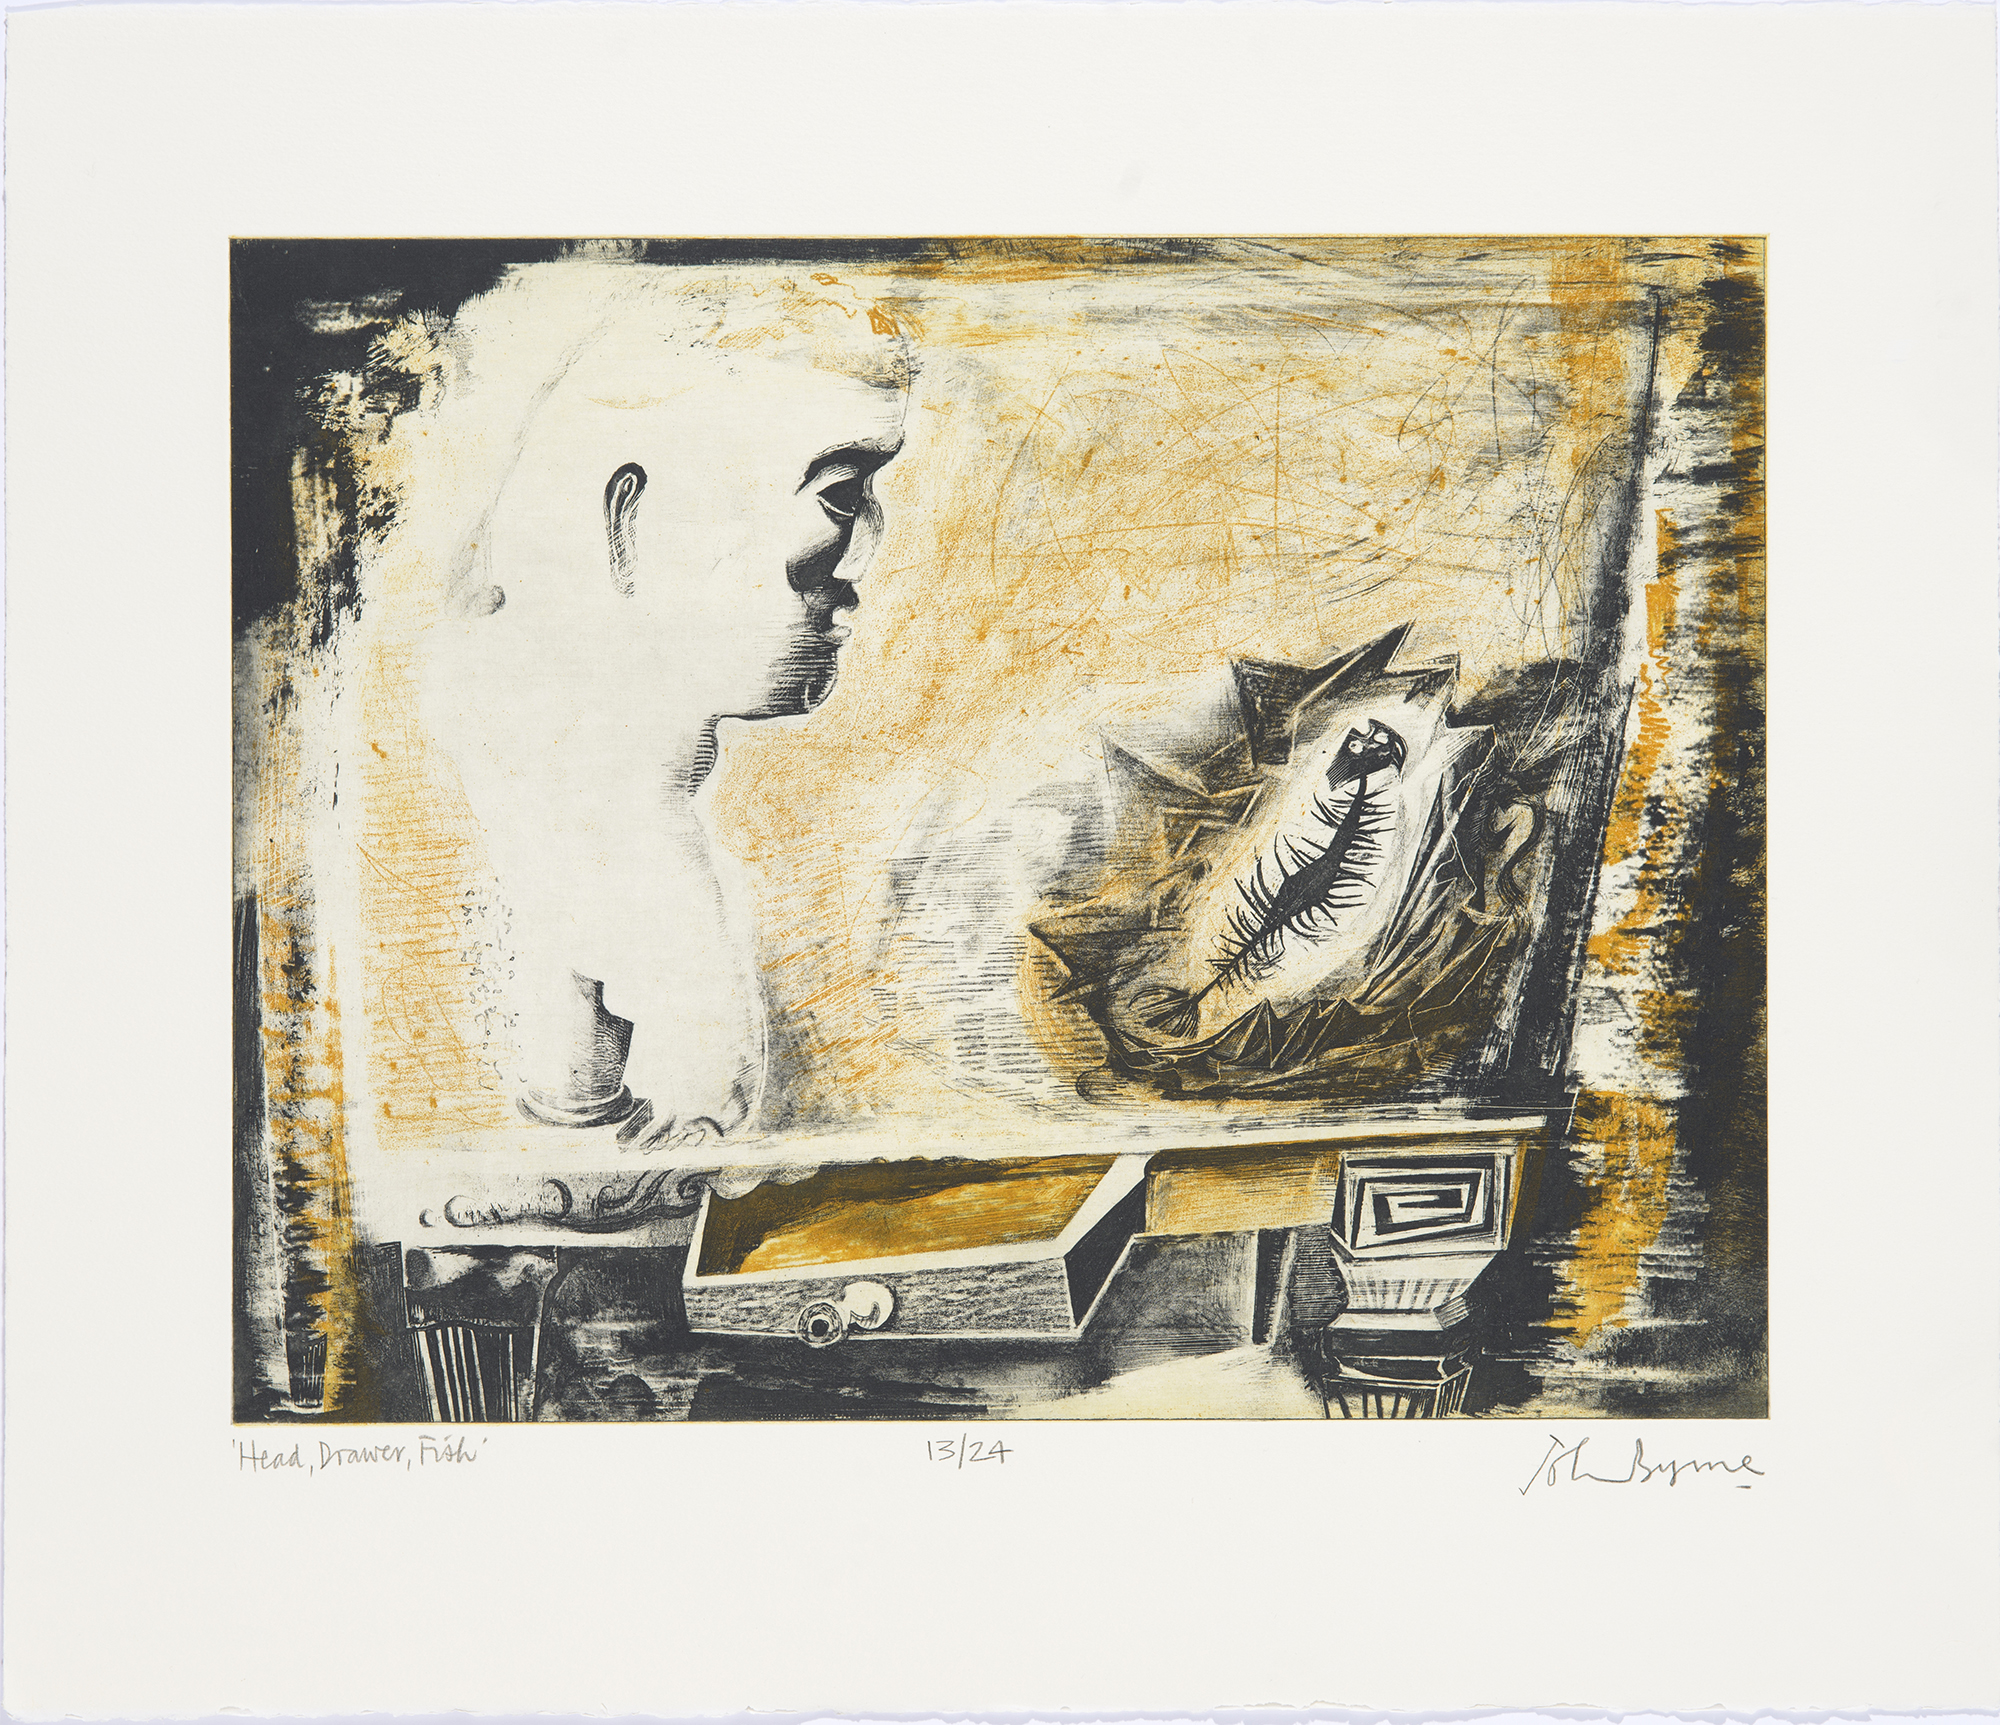 Two remaining John Byrne etchings will be on display